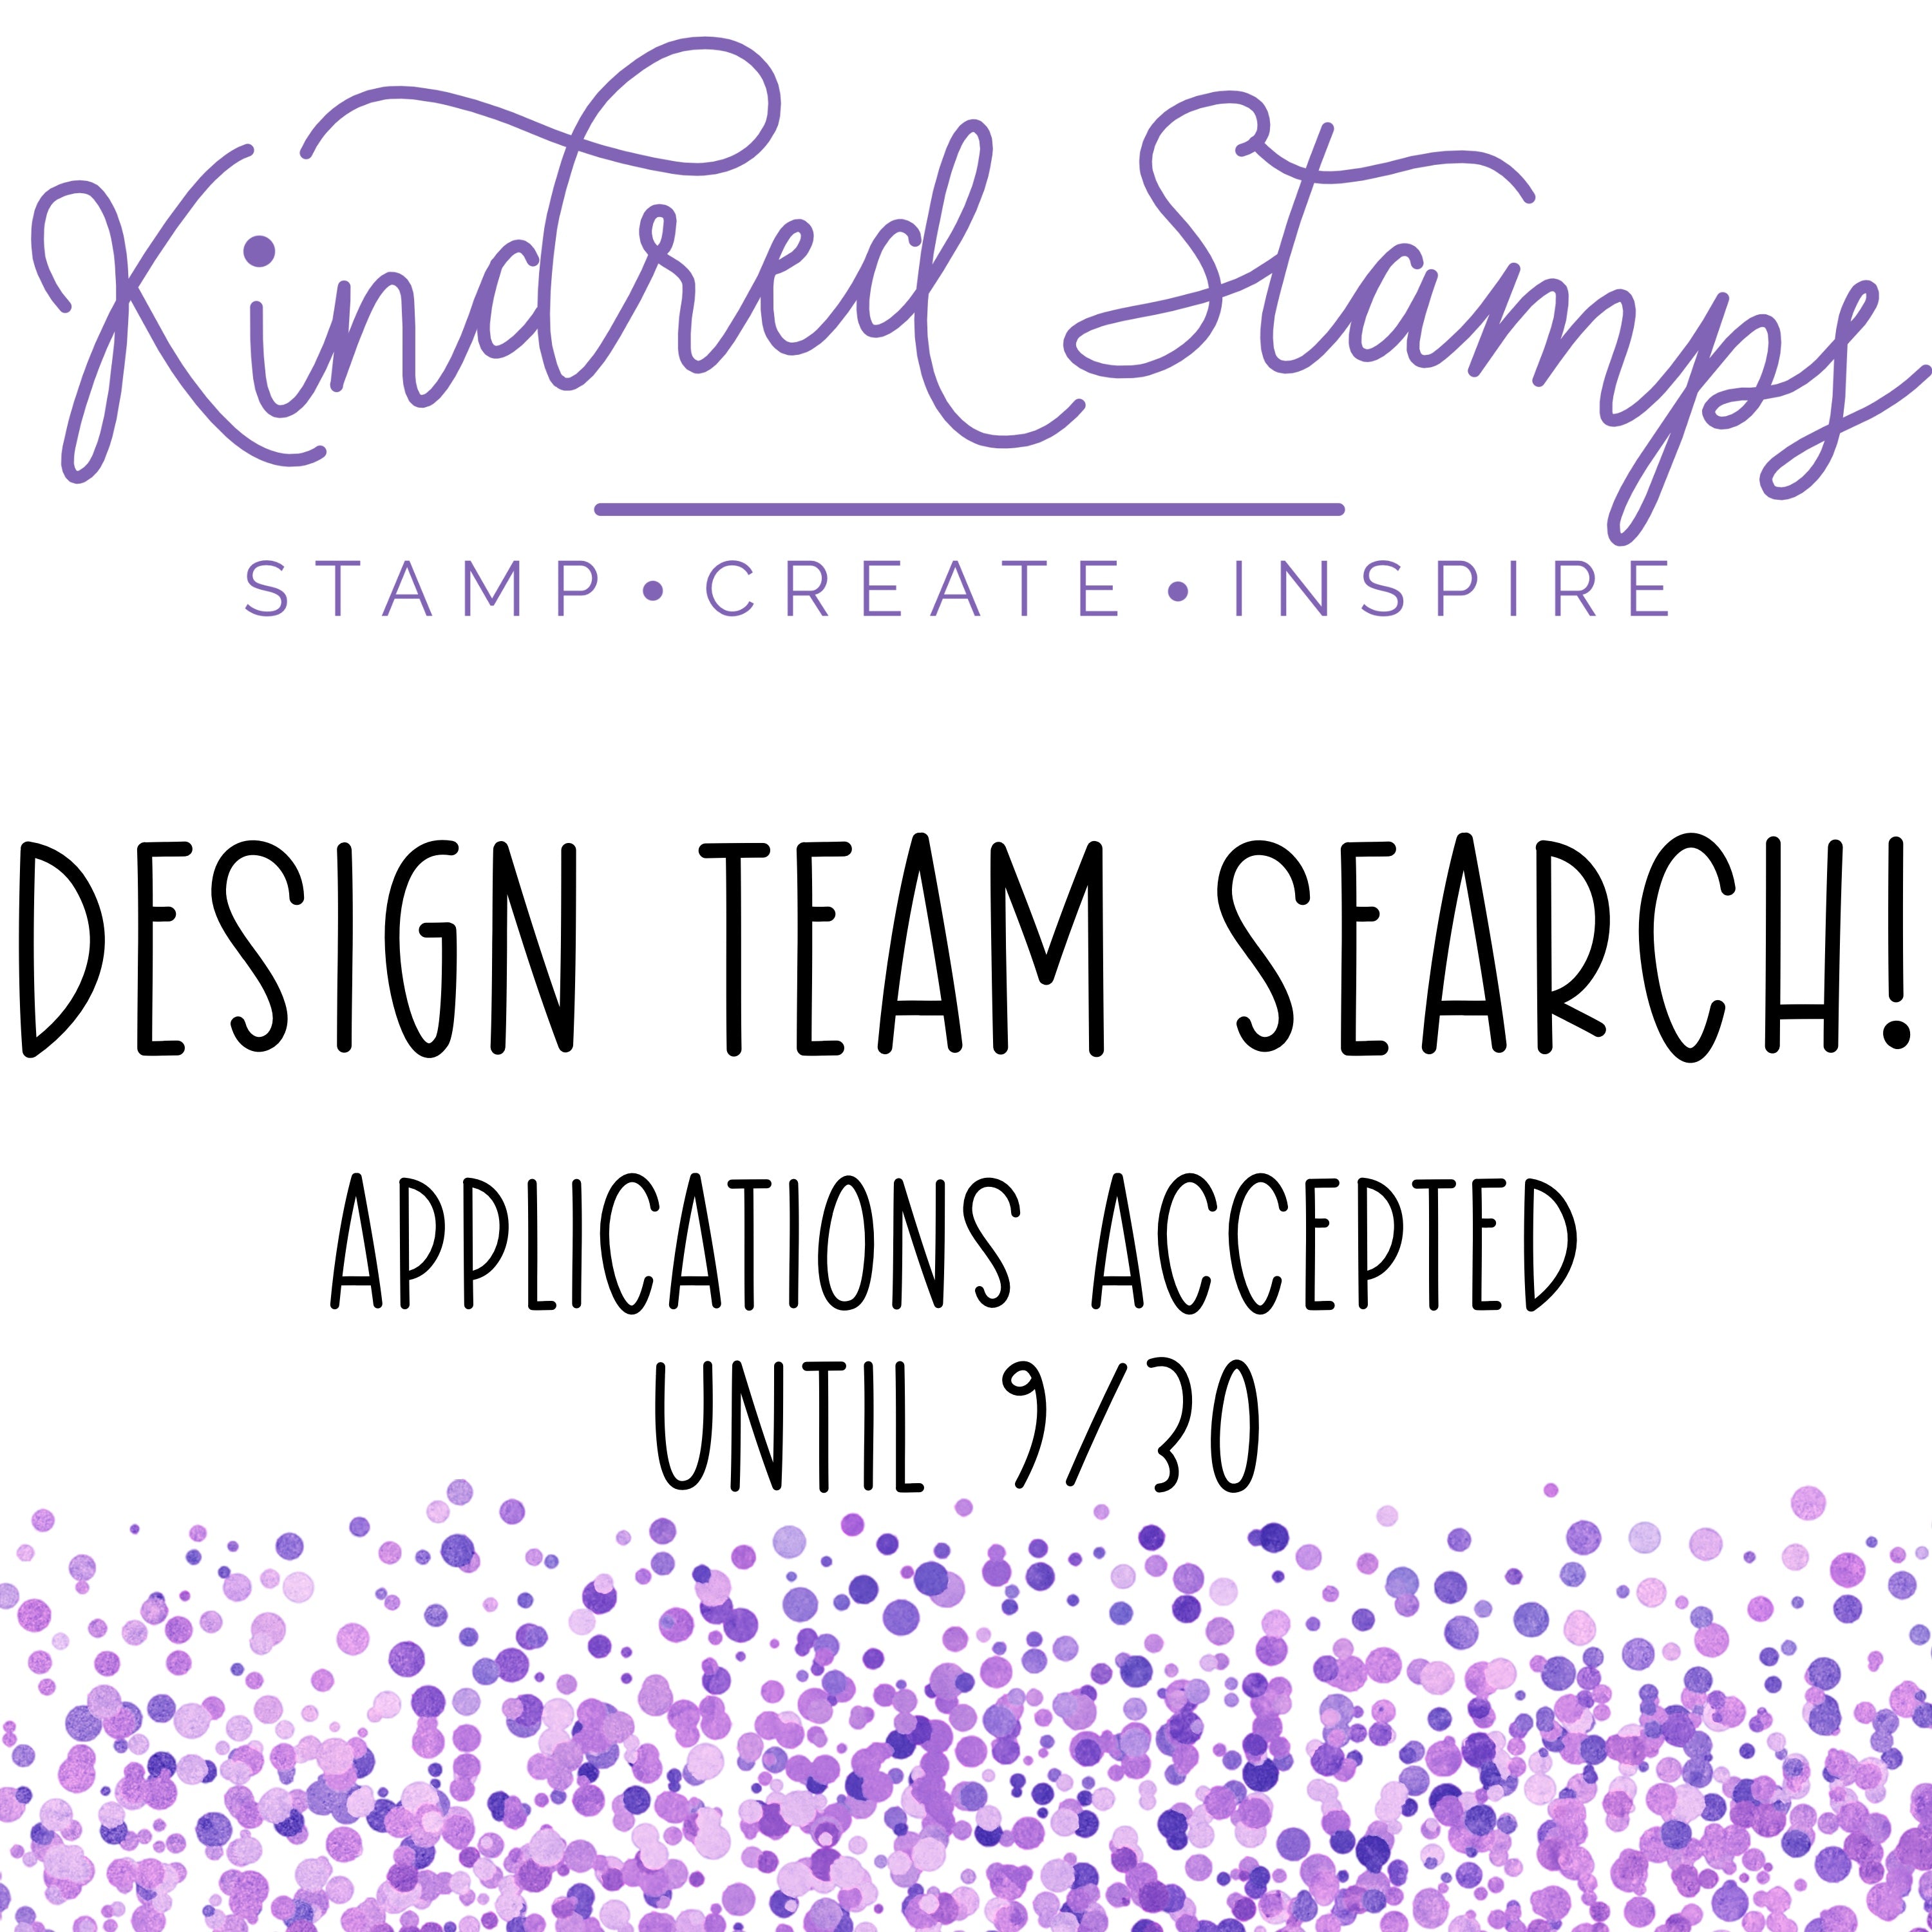 Design Team search now open!